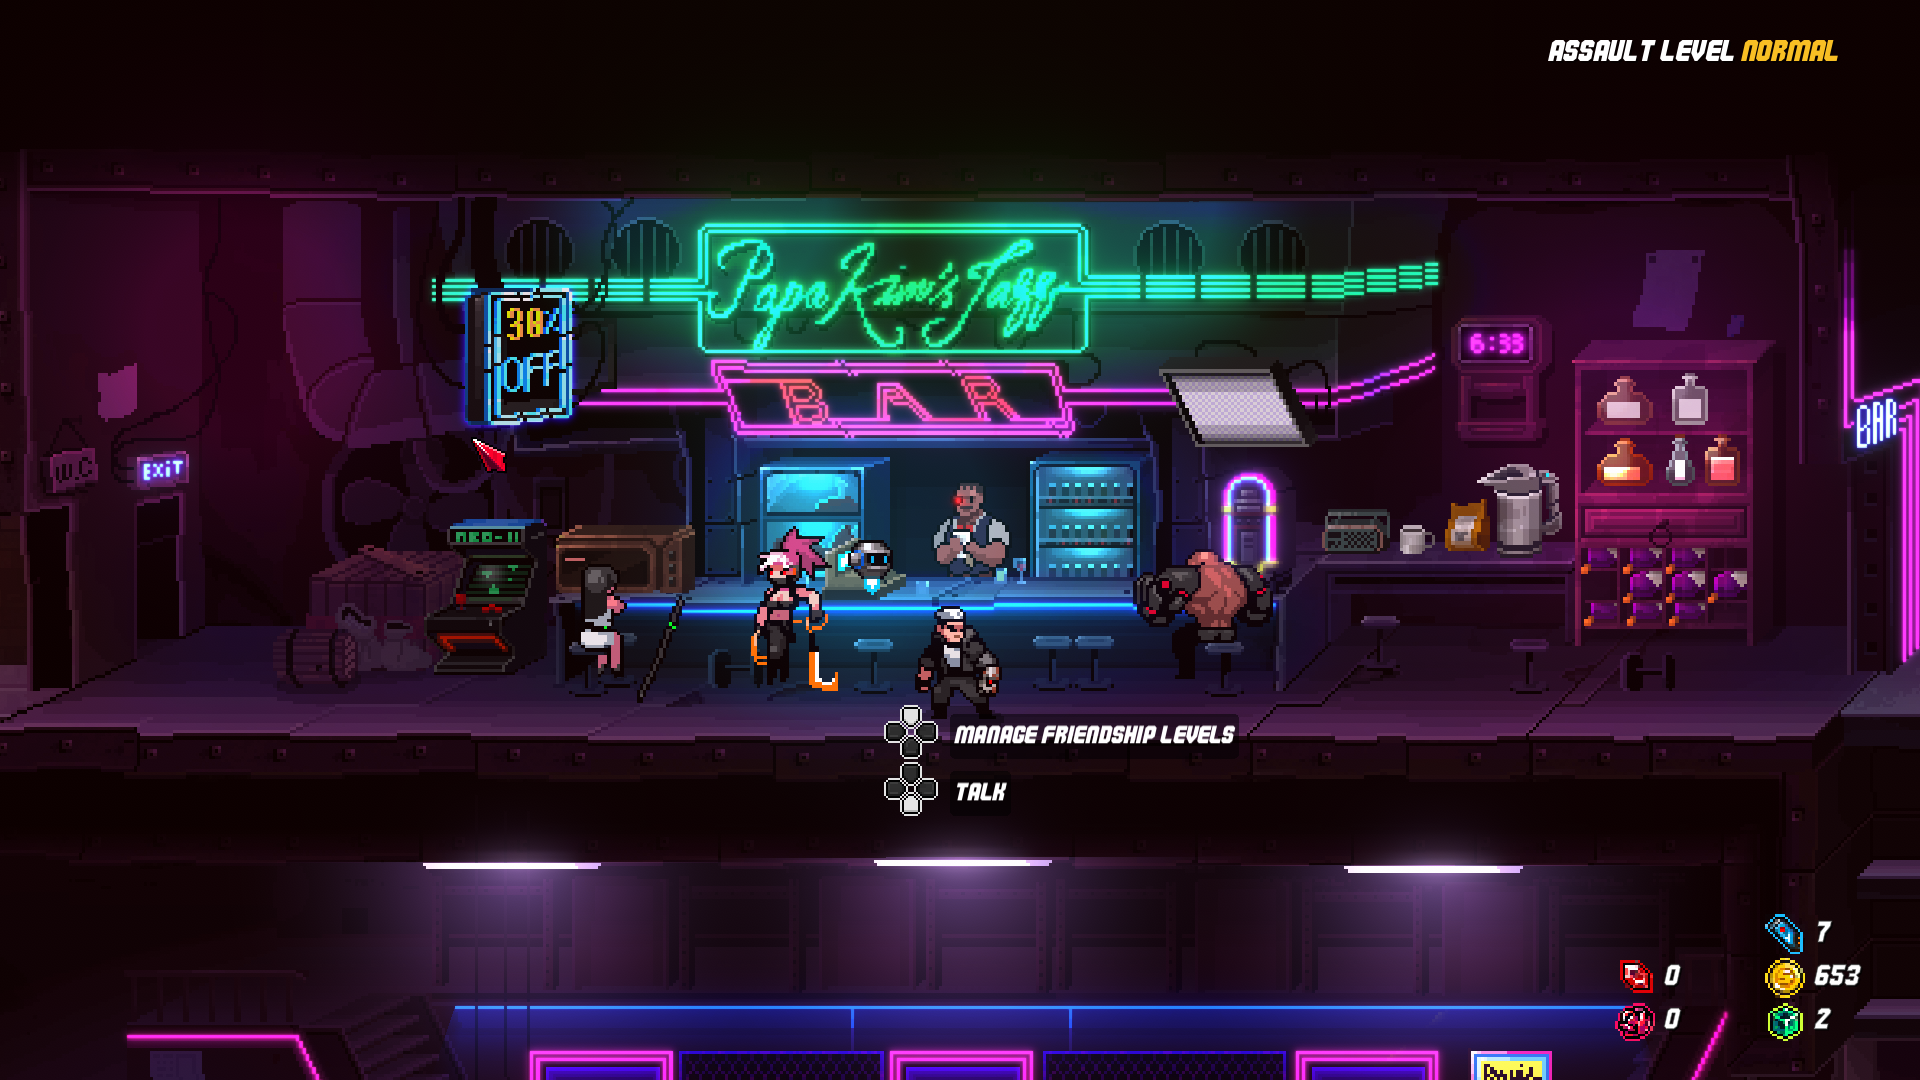 The player characters of Kil, Darcy, Jenny, and Jett chilling at the bar in the resistance base